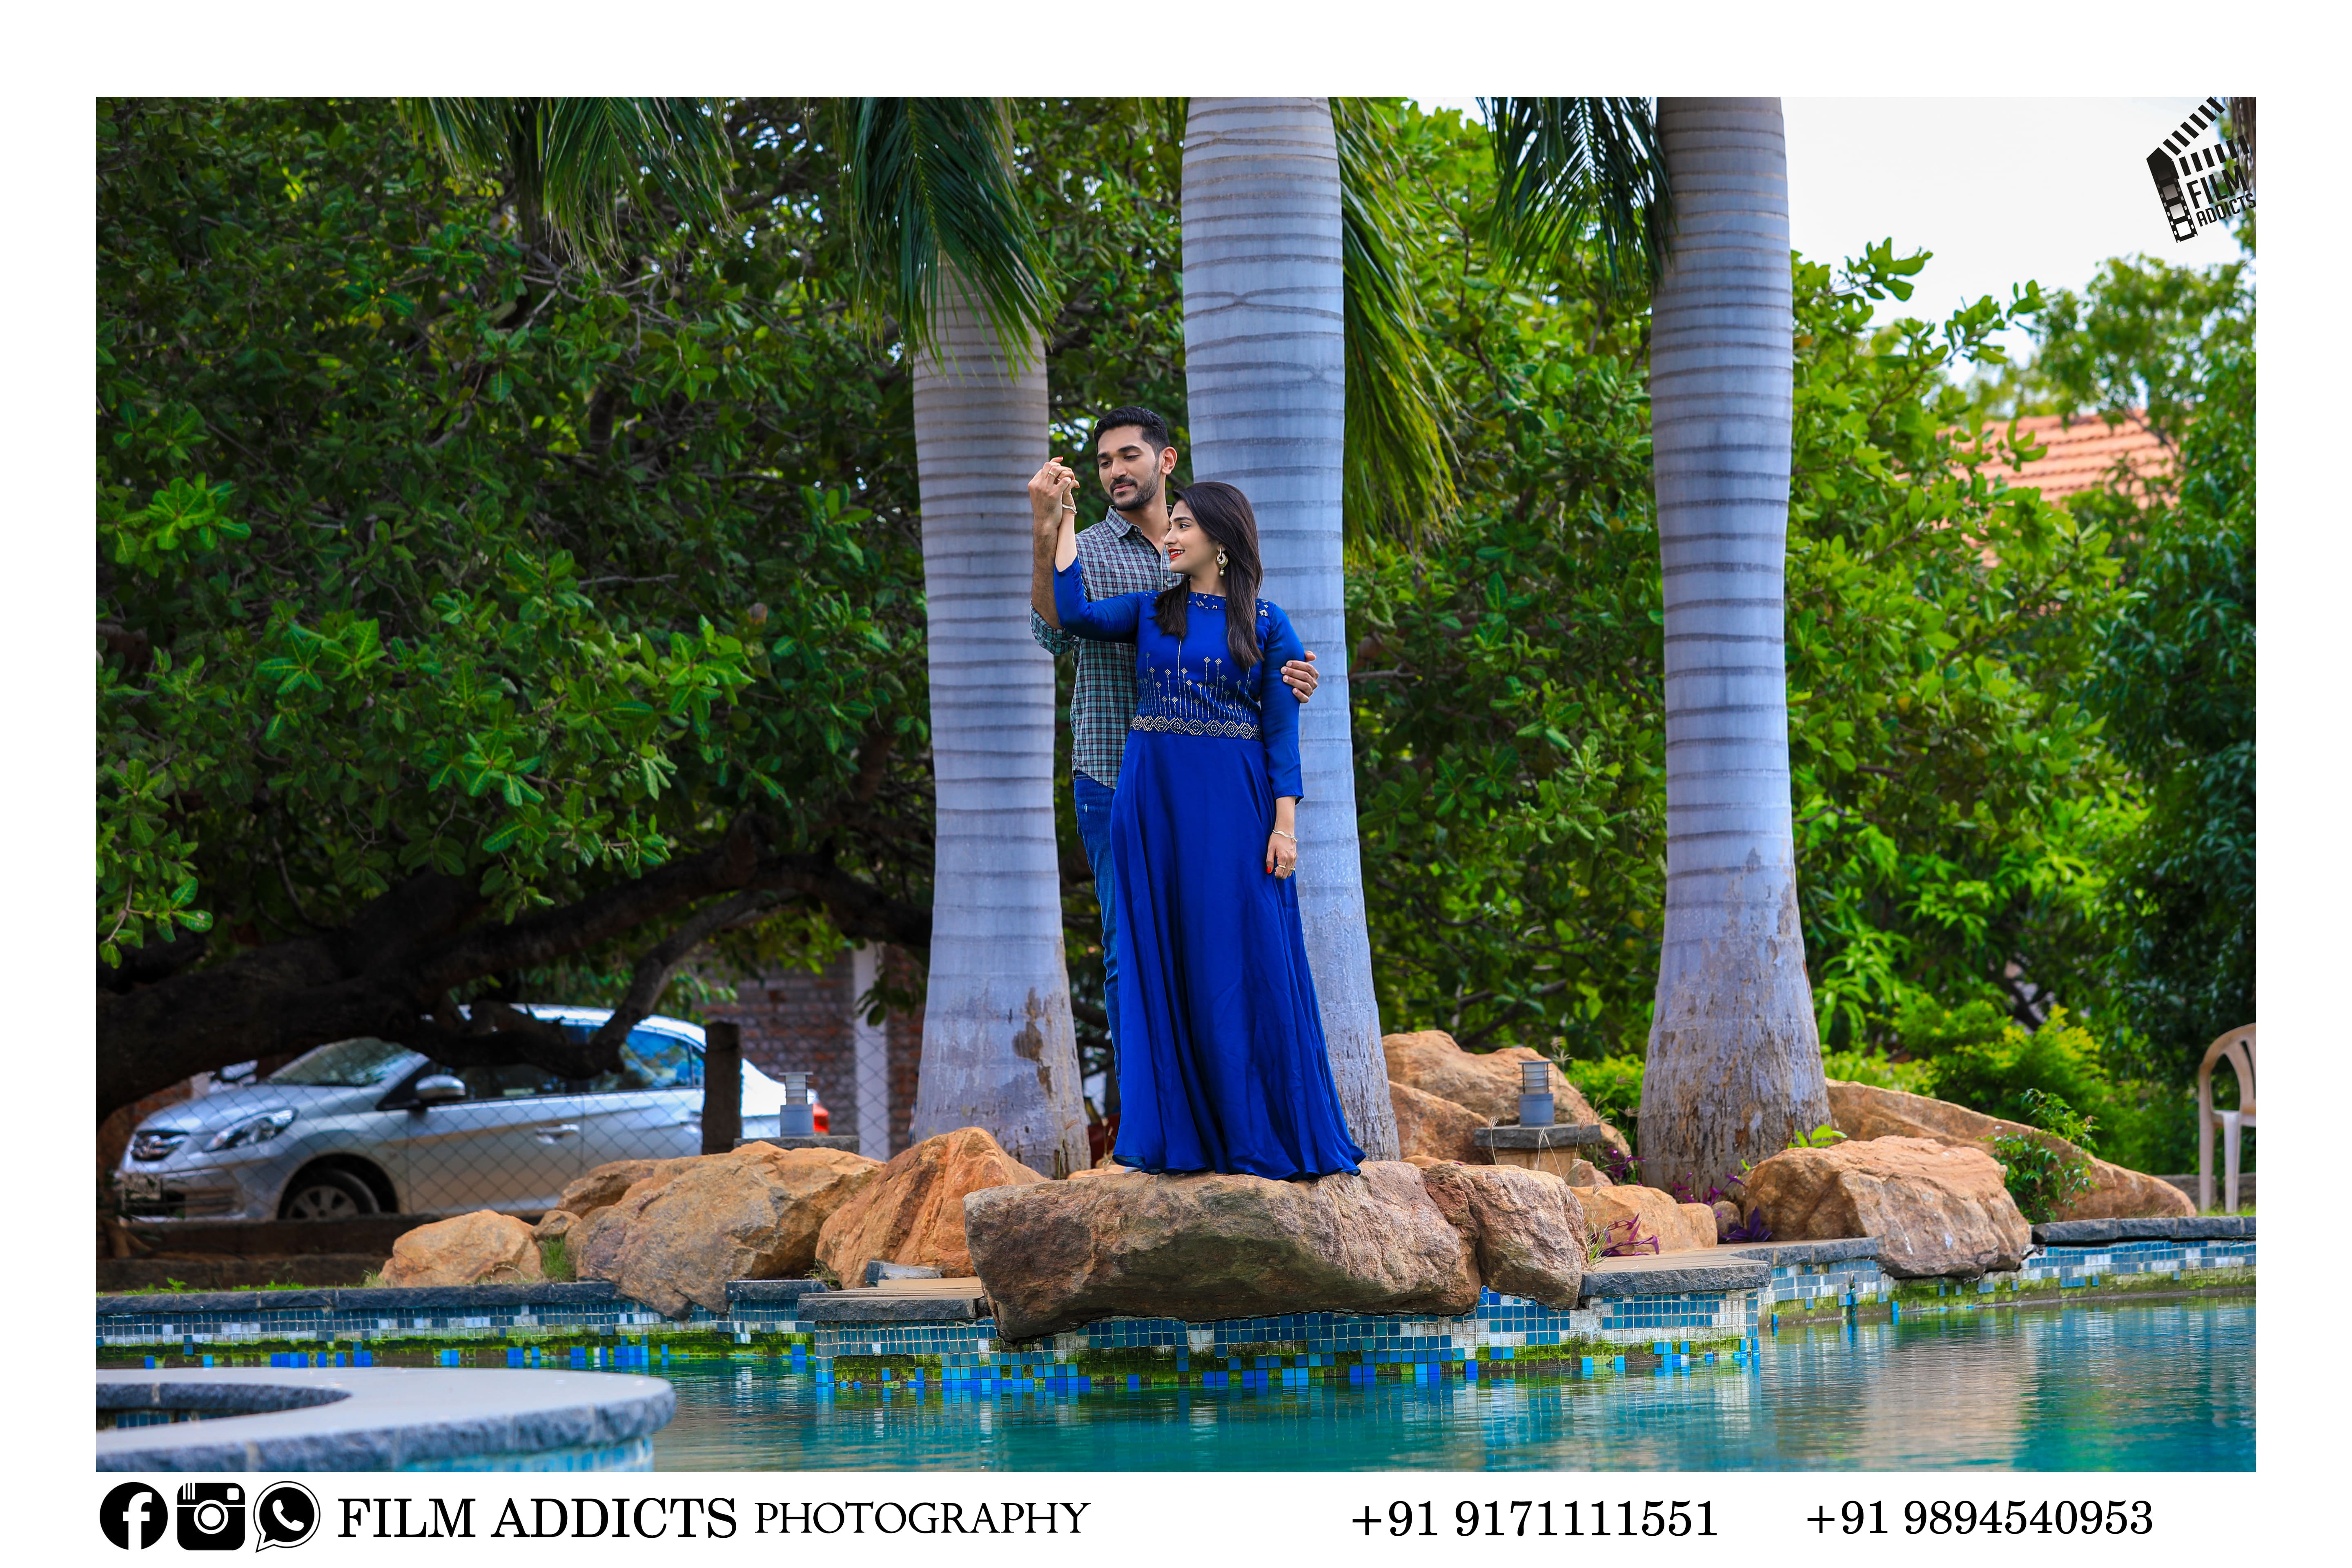  Best Outdoor Candid Song in Virudhunagar - FilmAddicts Photography, Best Wedding Photographers in Virudhunagar ,best candid photographers in Virudhunagar ,Best Wedding Candid photographers in Virudhunagar, Wedding Candid Moments, FilmAddicts Photography ,FilmAddictsPhotography ,best wedding in Virudhunagar, Best Candid shoot in Virudhunagar, Best moment ,Best wedding moments  , Best wedding photography in Virudhunagar, Best wedding videography in Virudhunagar, Bestcoupleshoot, Best candid, Best wedding shoot, Best wedding candid, best marriage photographers in Virudhunagar, best marriage photography in Virudhunagar, best candid photography, best Virudhunagar photography, Virudhunagar ,Virudhunagar photography ,Virudhunagar couples ,candid shoot ,candid ,tamilnadu wedding photography, best photographers in Virudhunagar, Tamilnadu